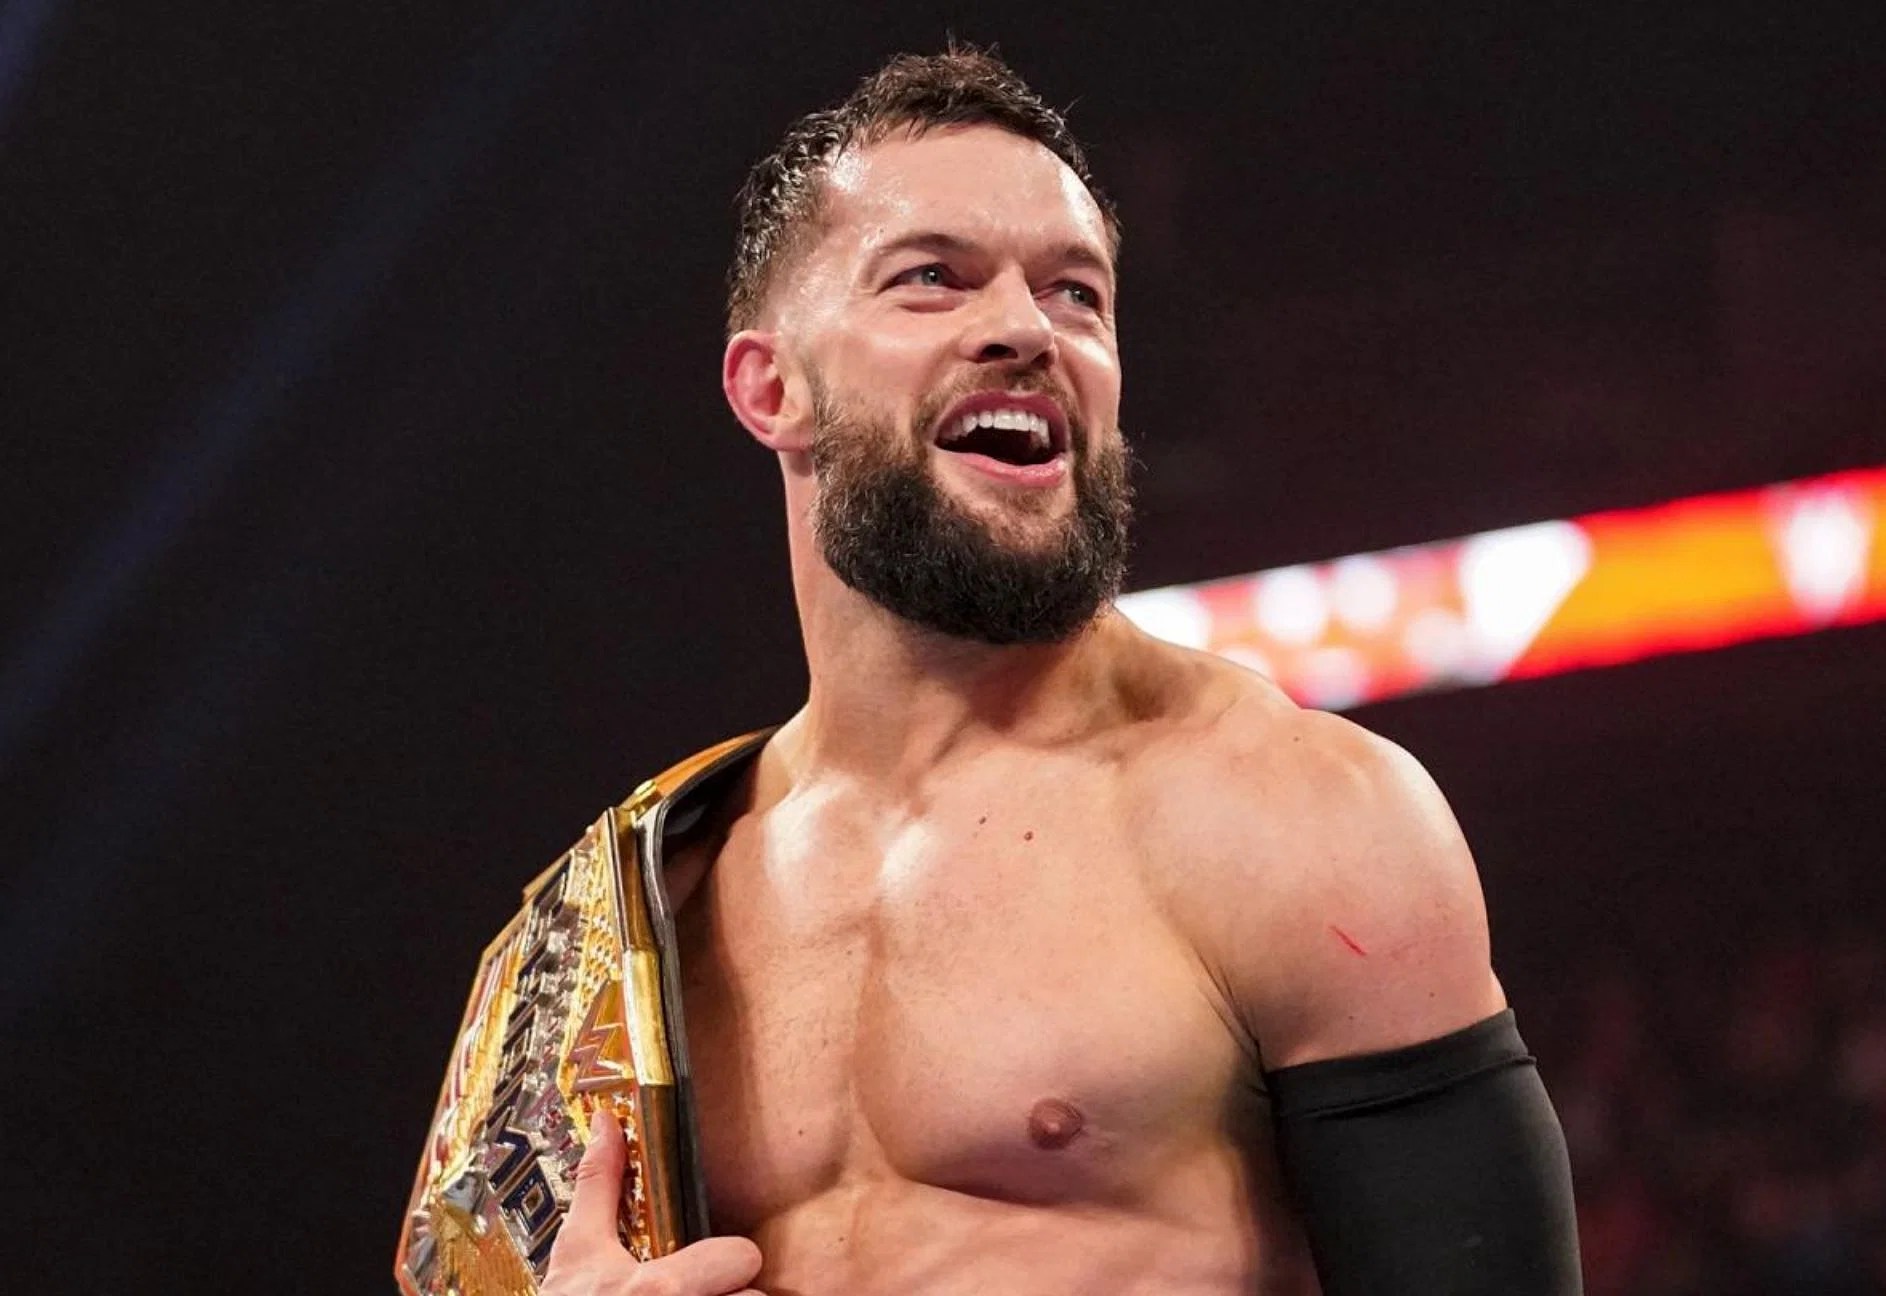 WWE News: “The Money is not that good for the amount of pain”, Finn Balor expresses his views on his wrestling career